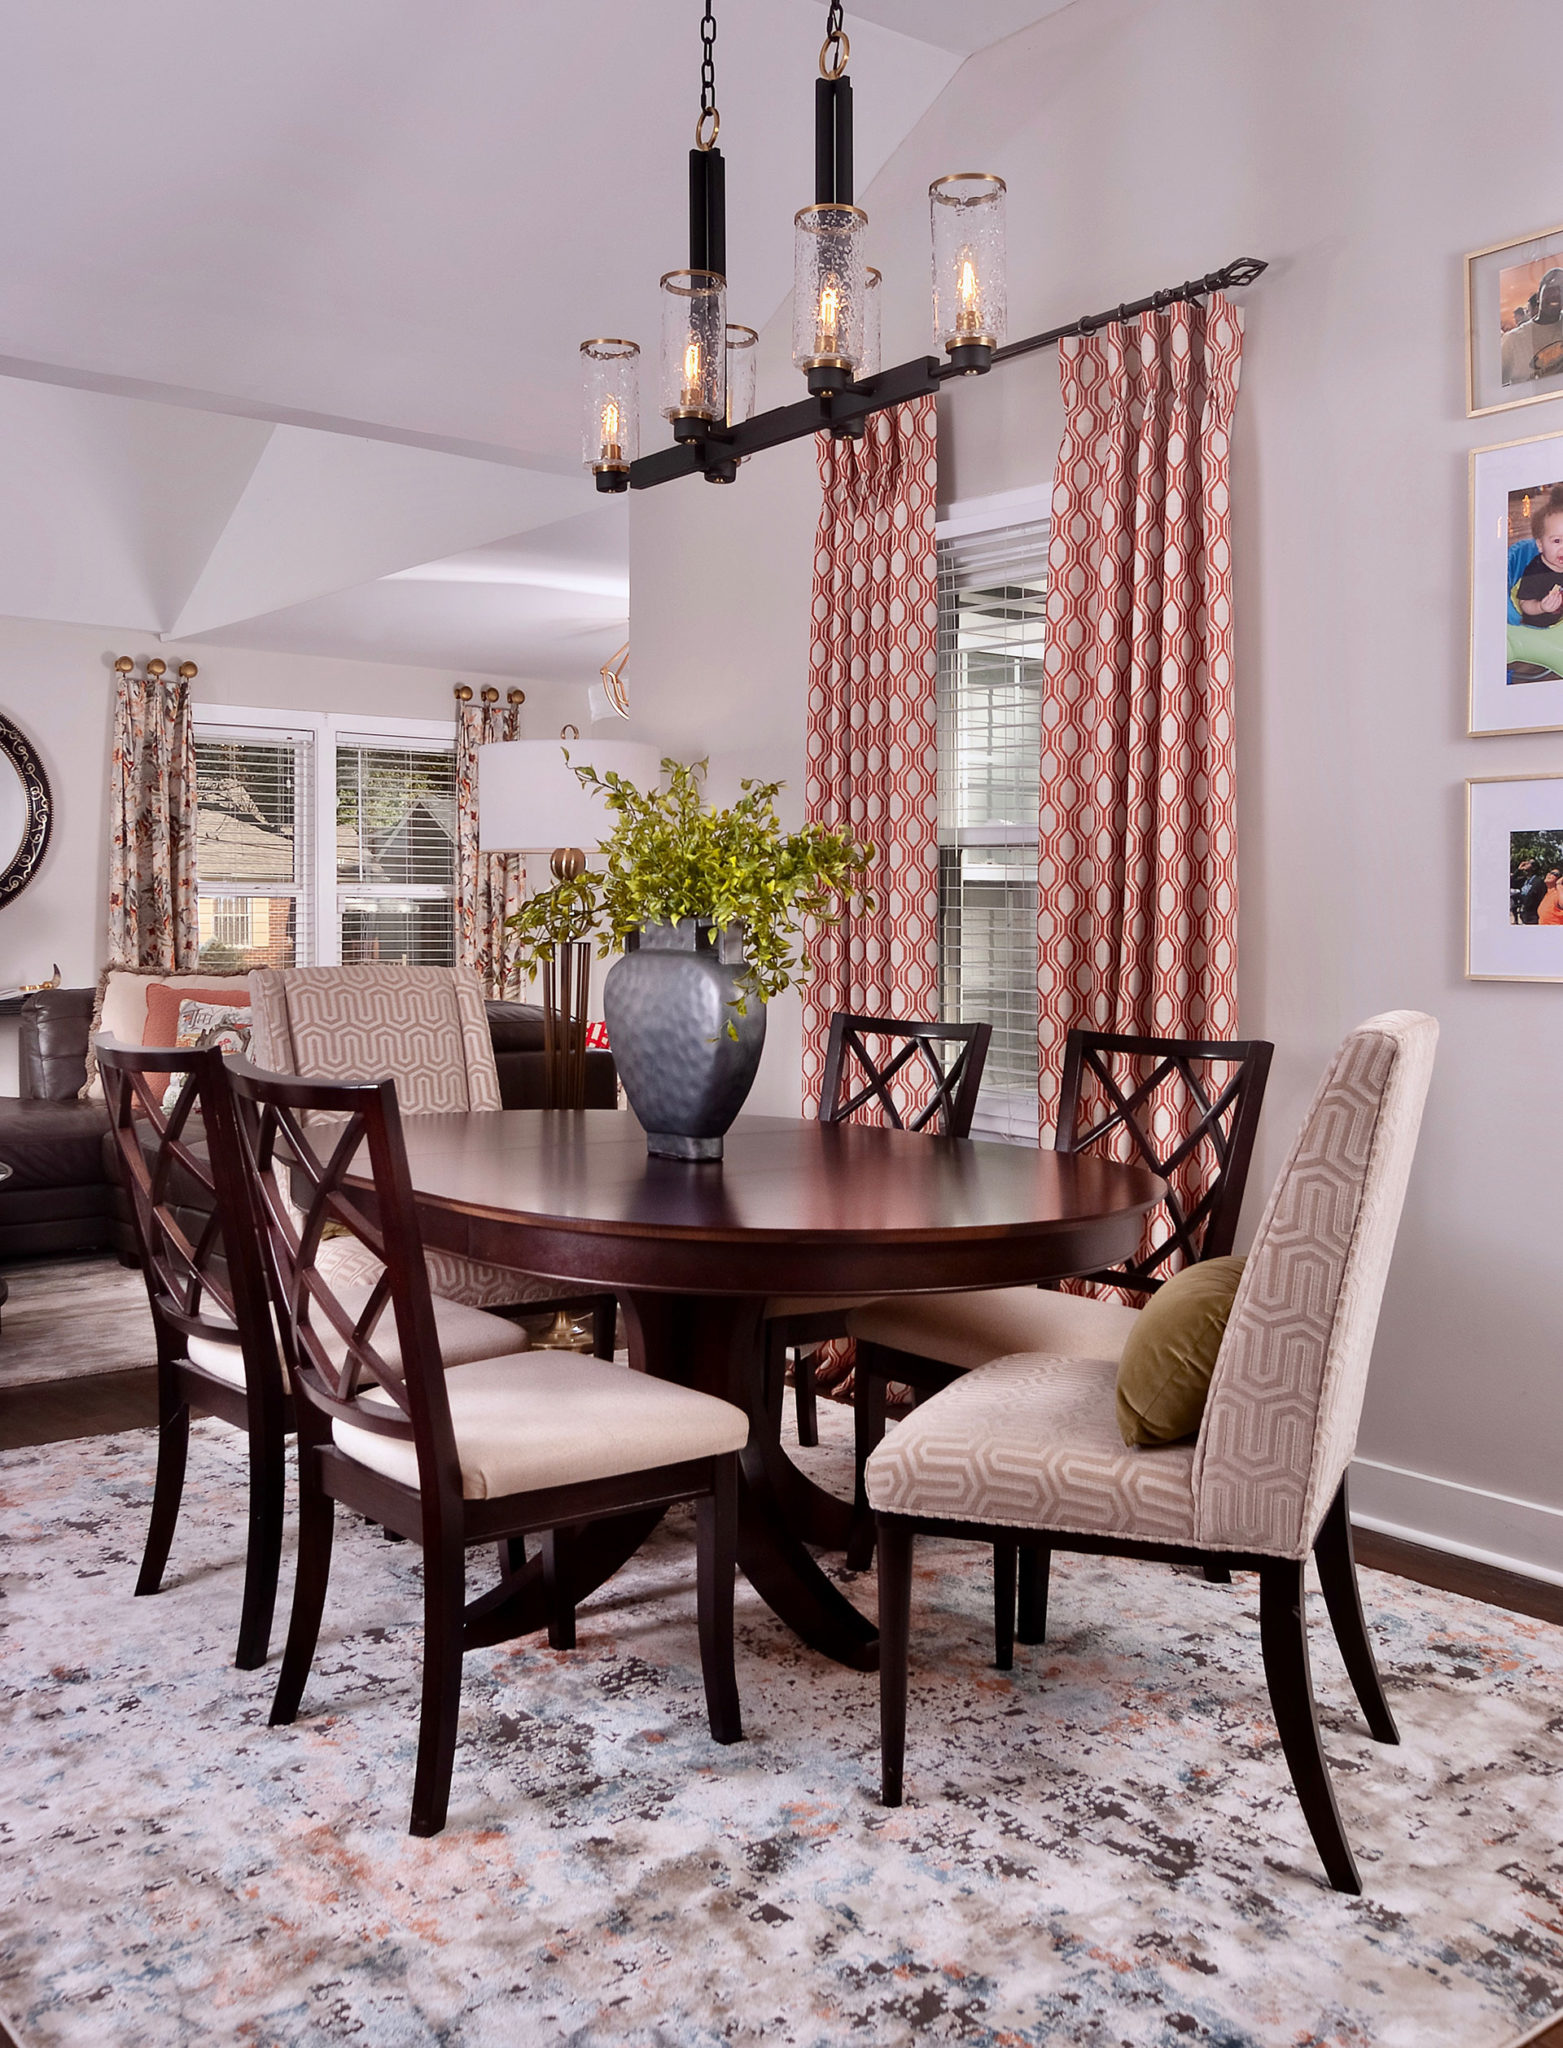 Dining Room with Shades of Pink and Red